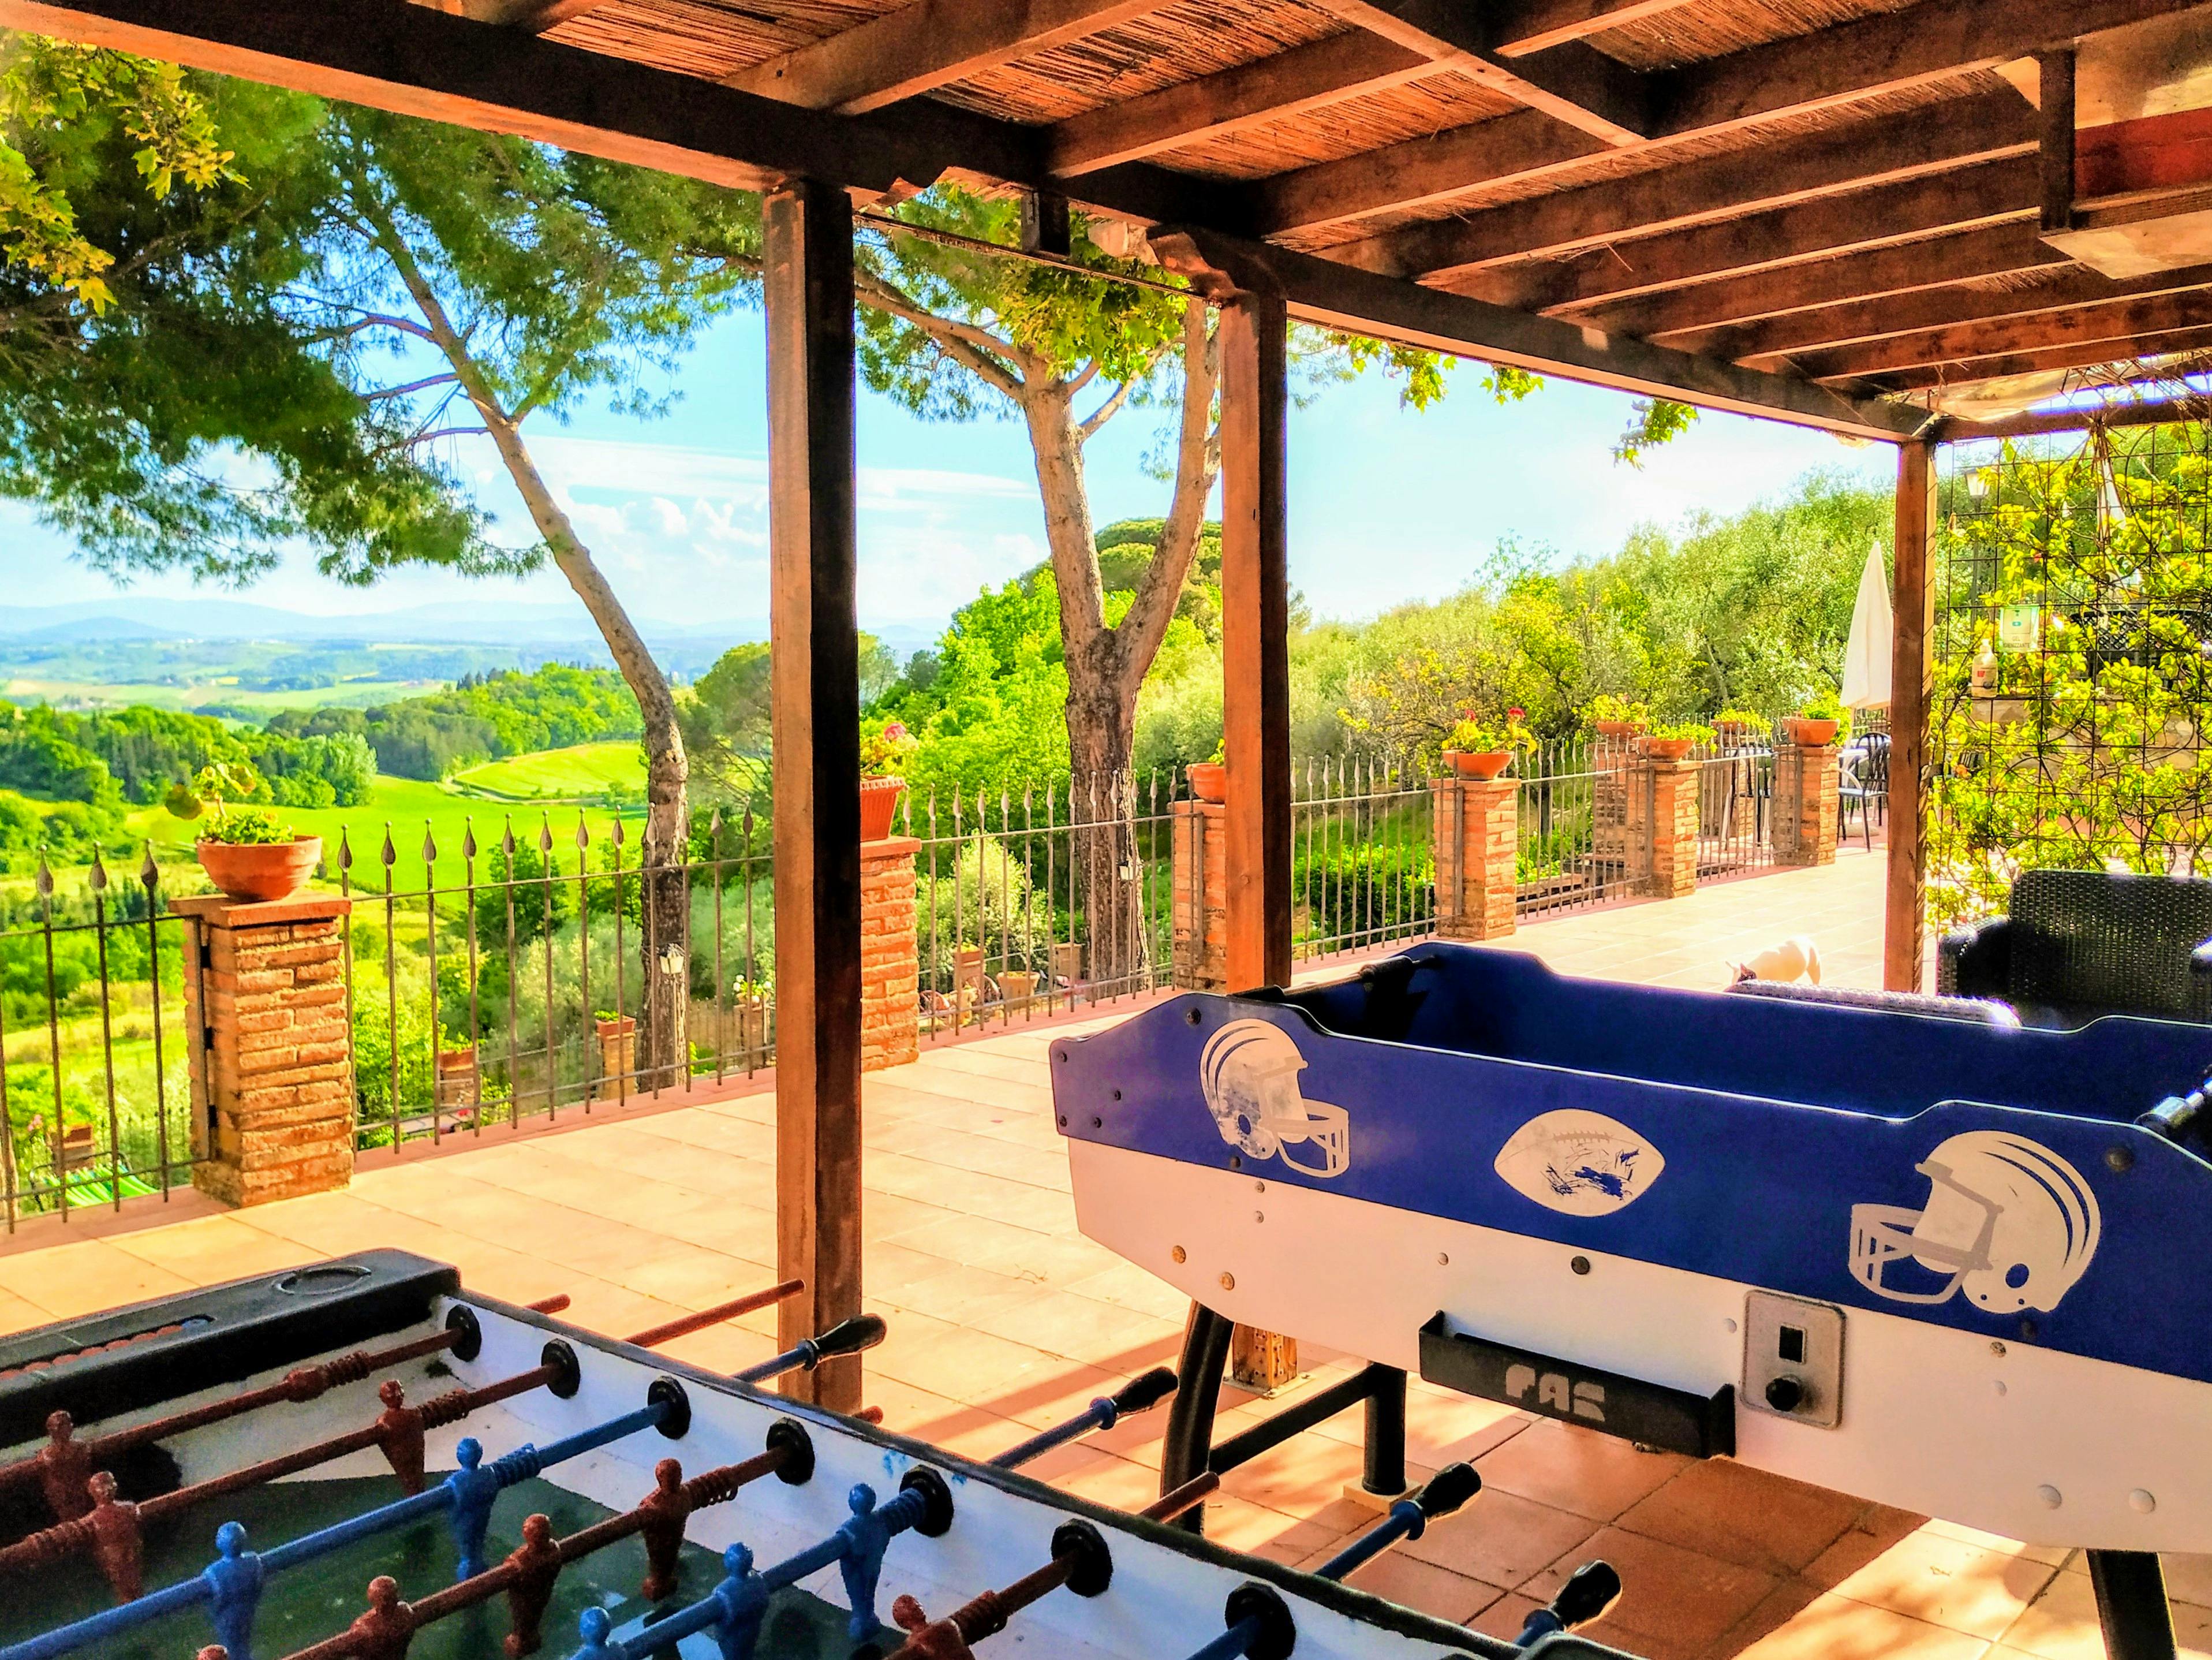 Agriturismo Vernianello,Chianti accommodation with pool near